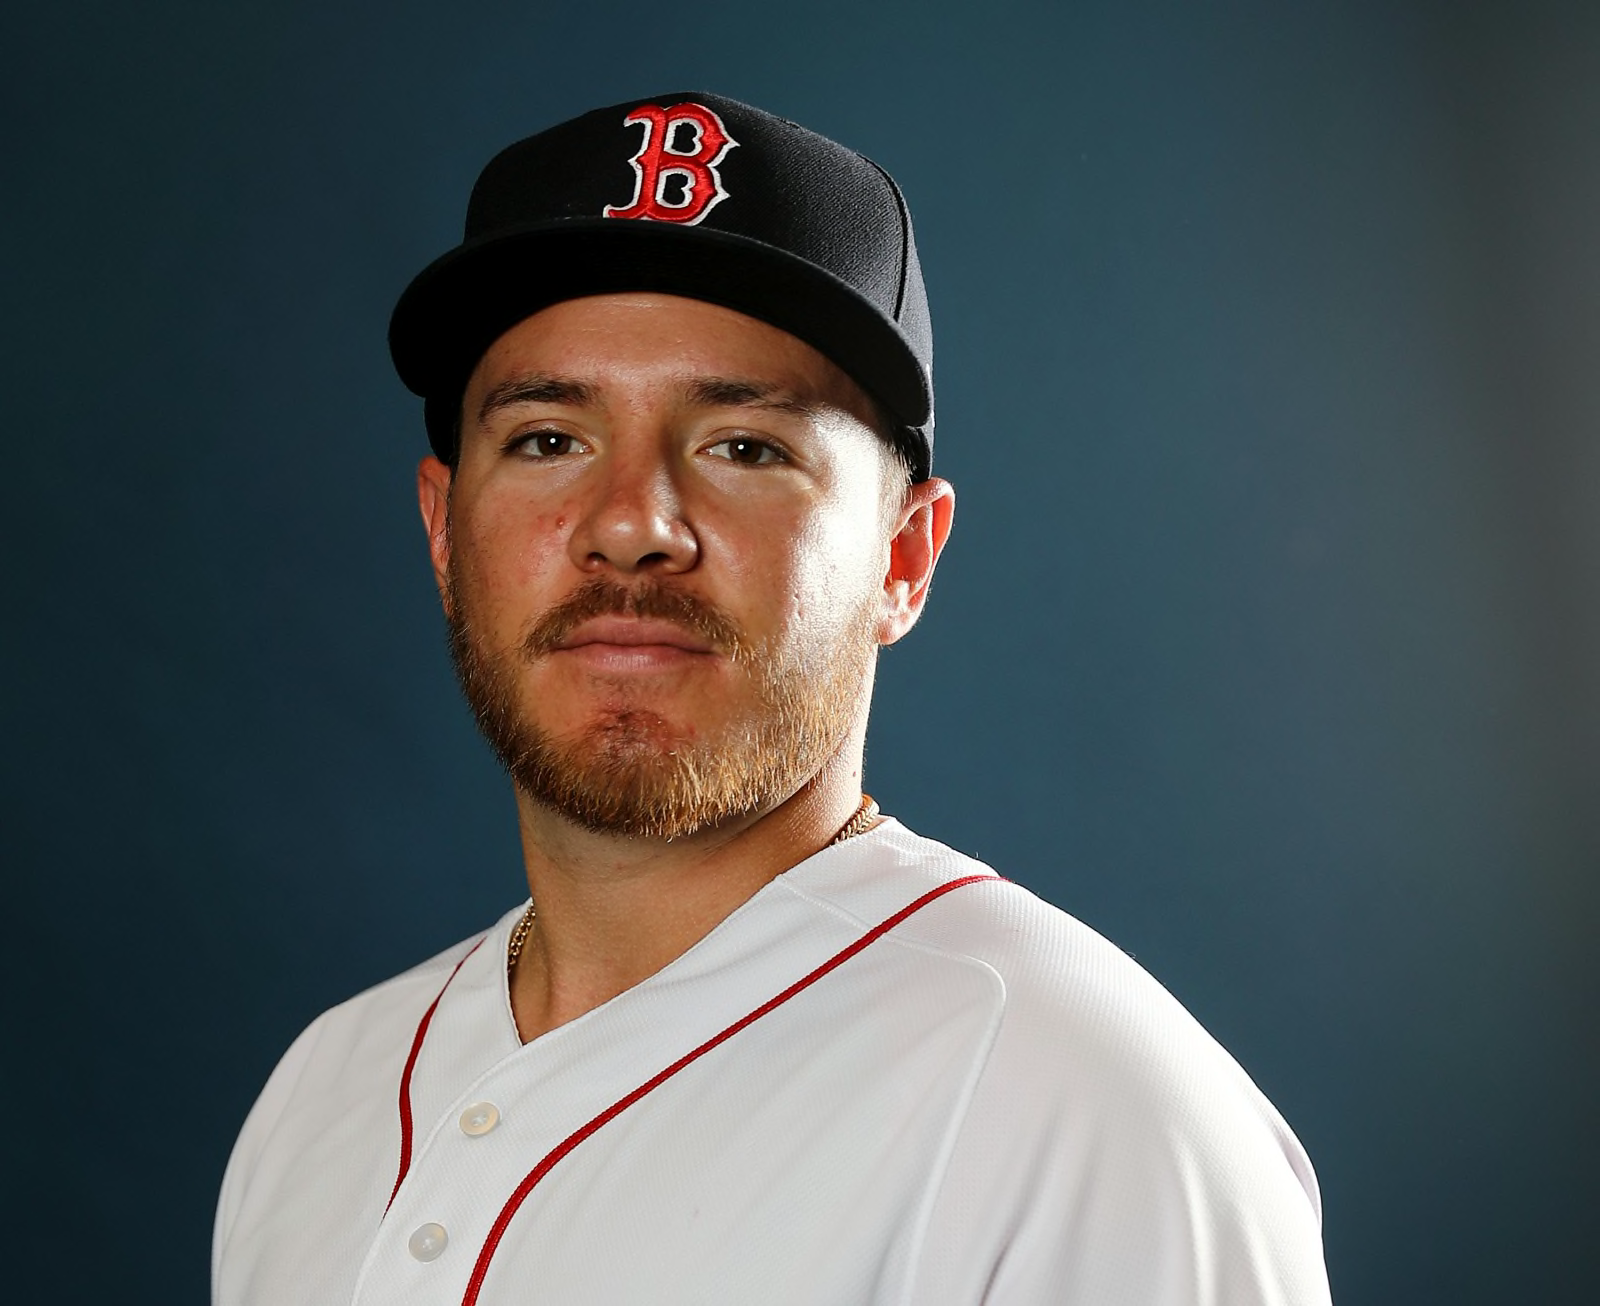 Boston Red Sox Rookie of the Year candidates for the near future Page 2